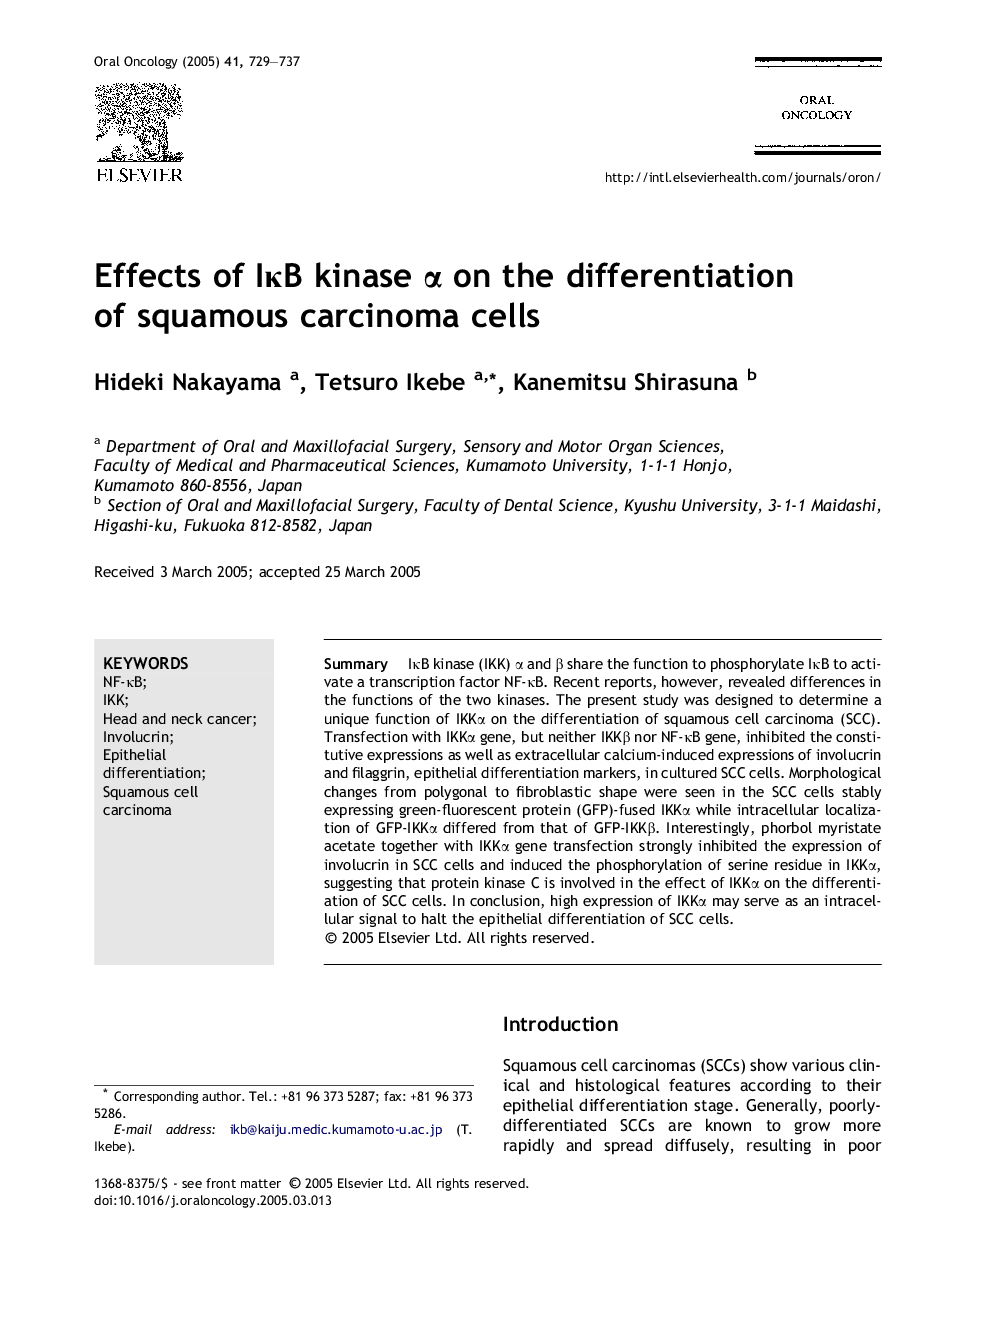 Effects of IÎºB kinase Î± on the differentiation of squamous carcinoma cells